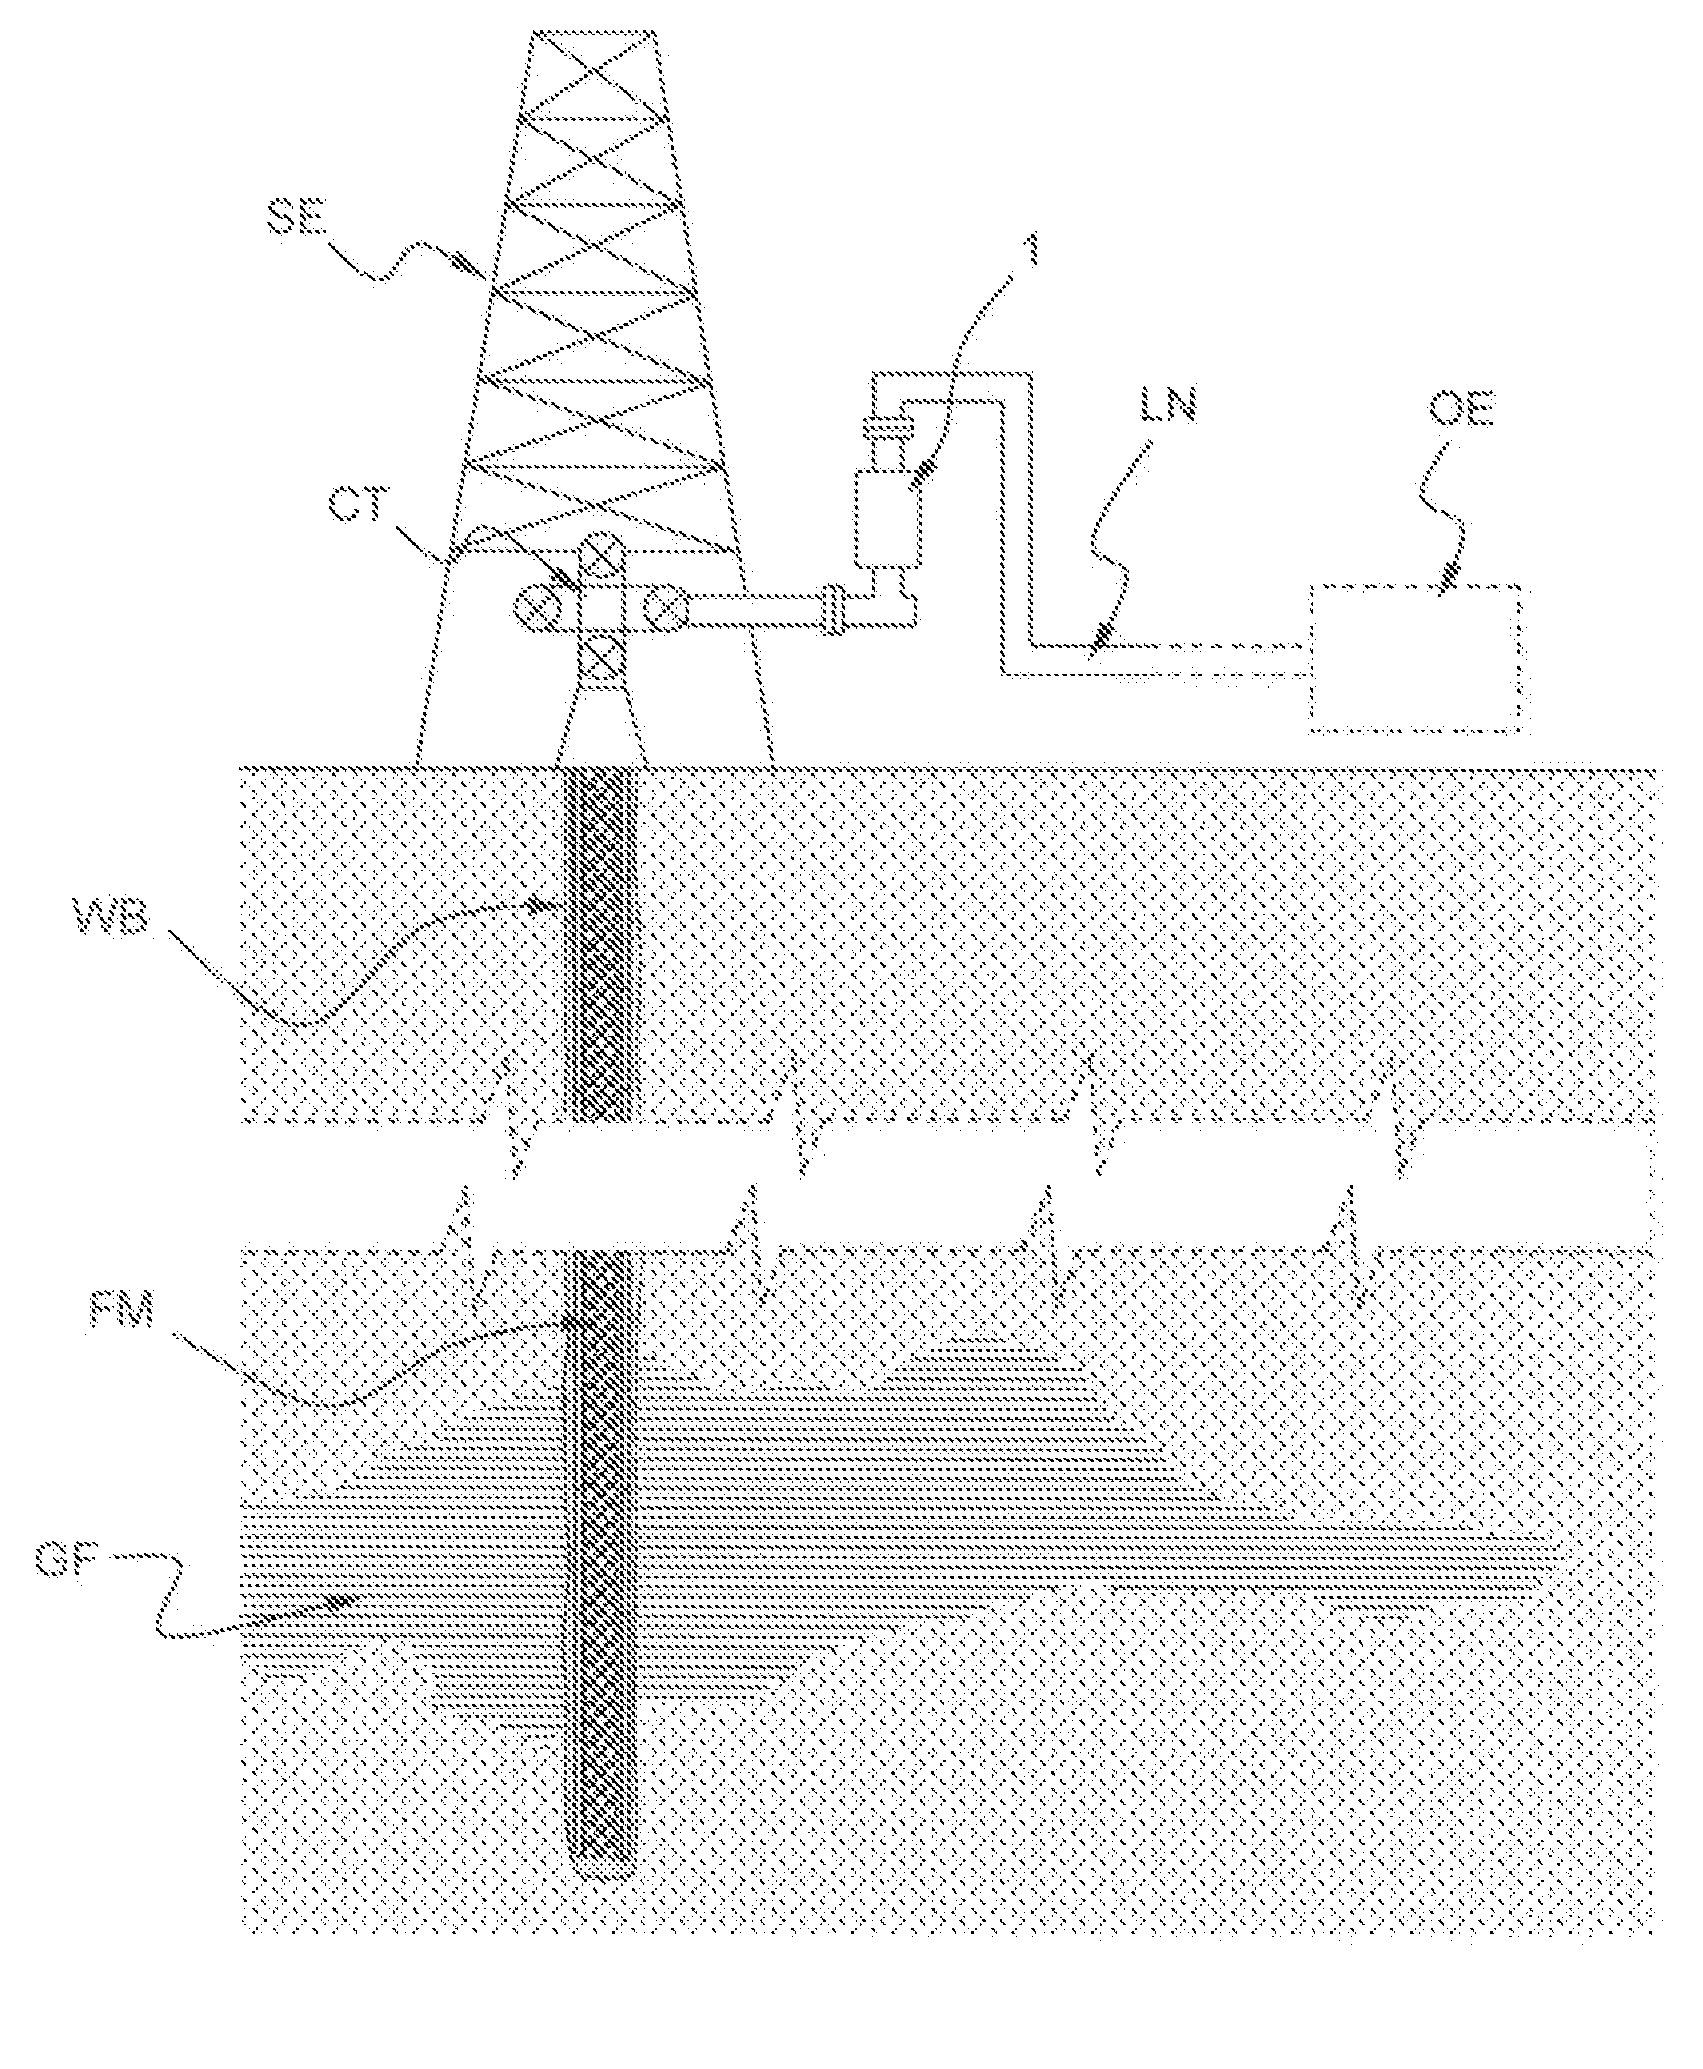 Apparatus and Method for Determining a Characteristic Ratio and a Parameter Affecting the Characteristic Ratio of a Multiphase Fluid Mixture